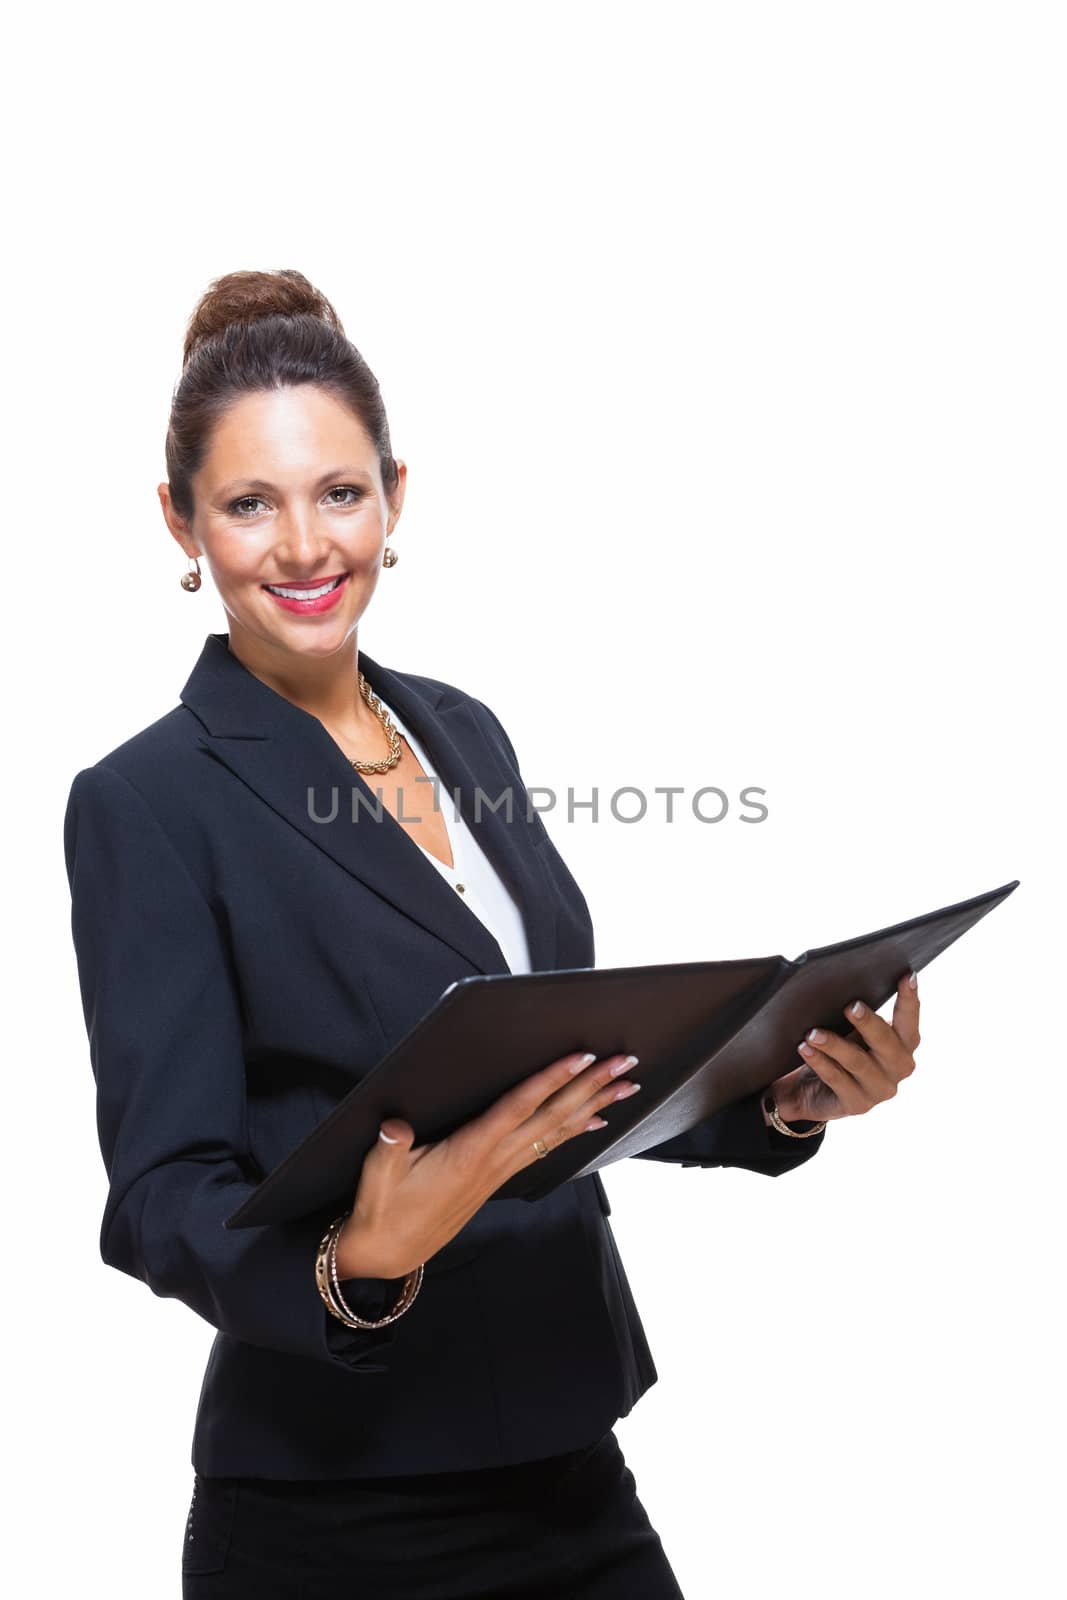 Portrait of an Attractive Young Businesswoman in Black Suit, Holding a File Folder and Smiling at the Camera. Isolated on White Background.